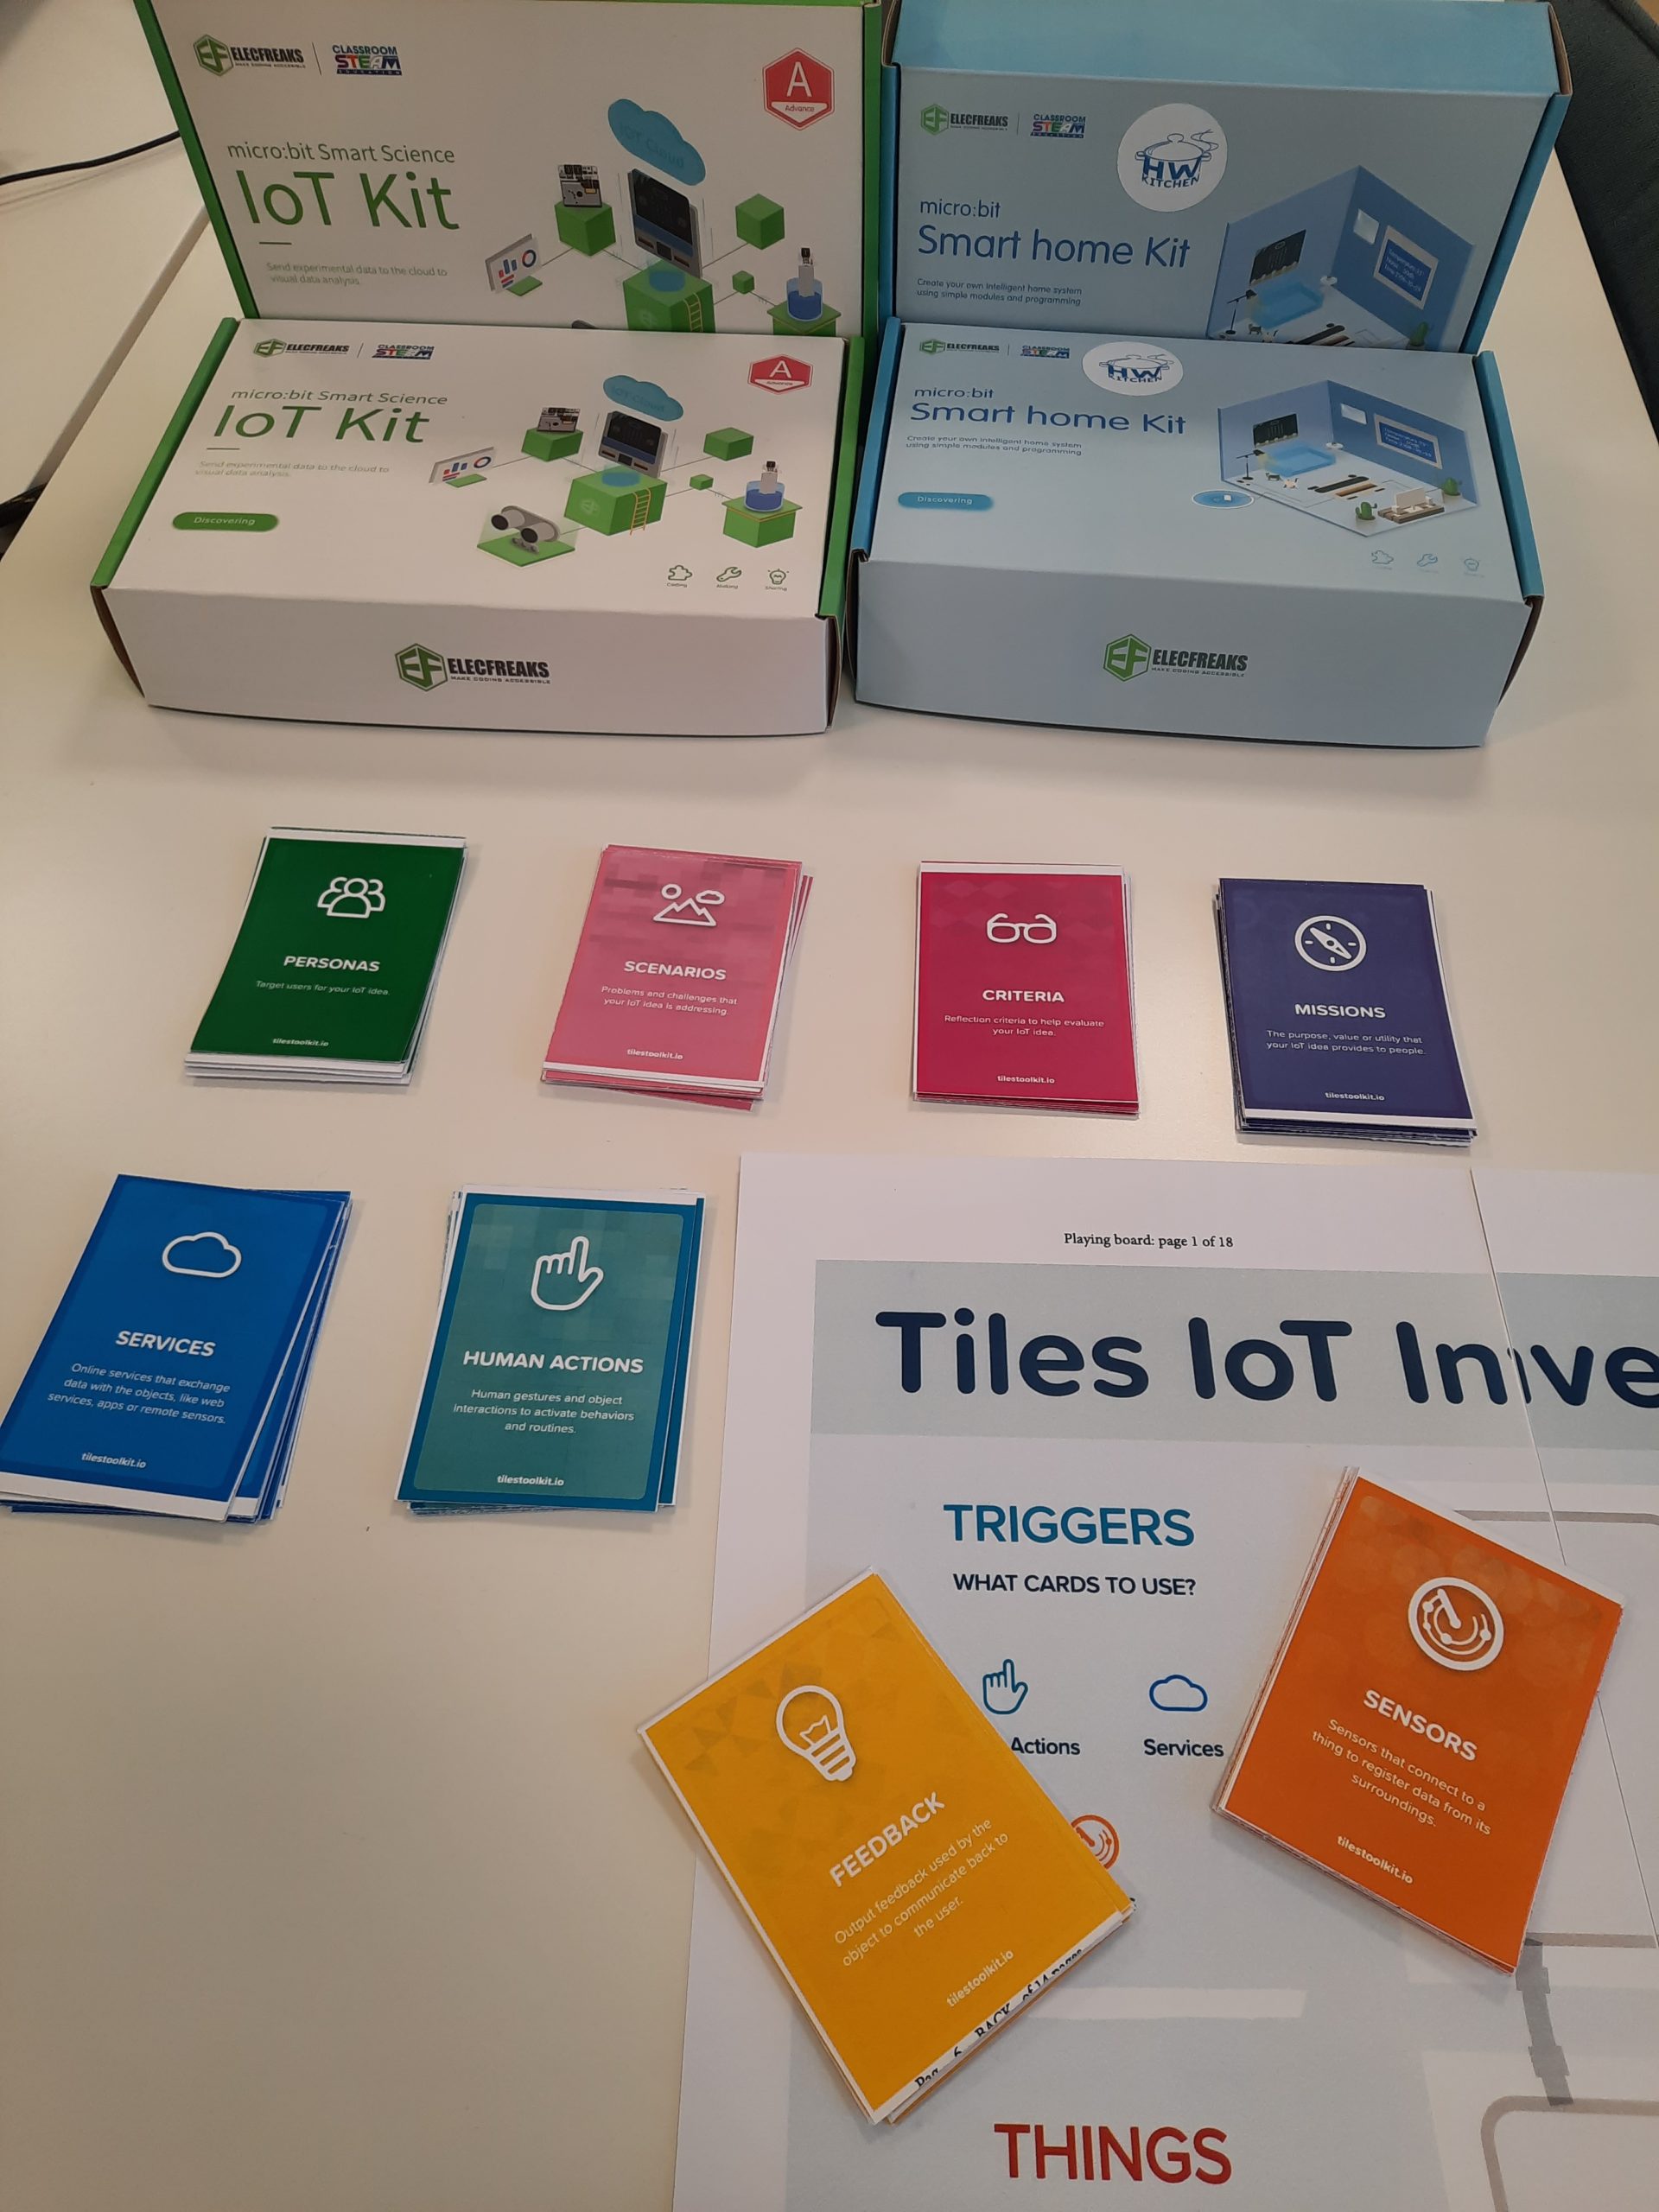 IoT workshops – make your own toy